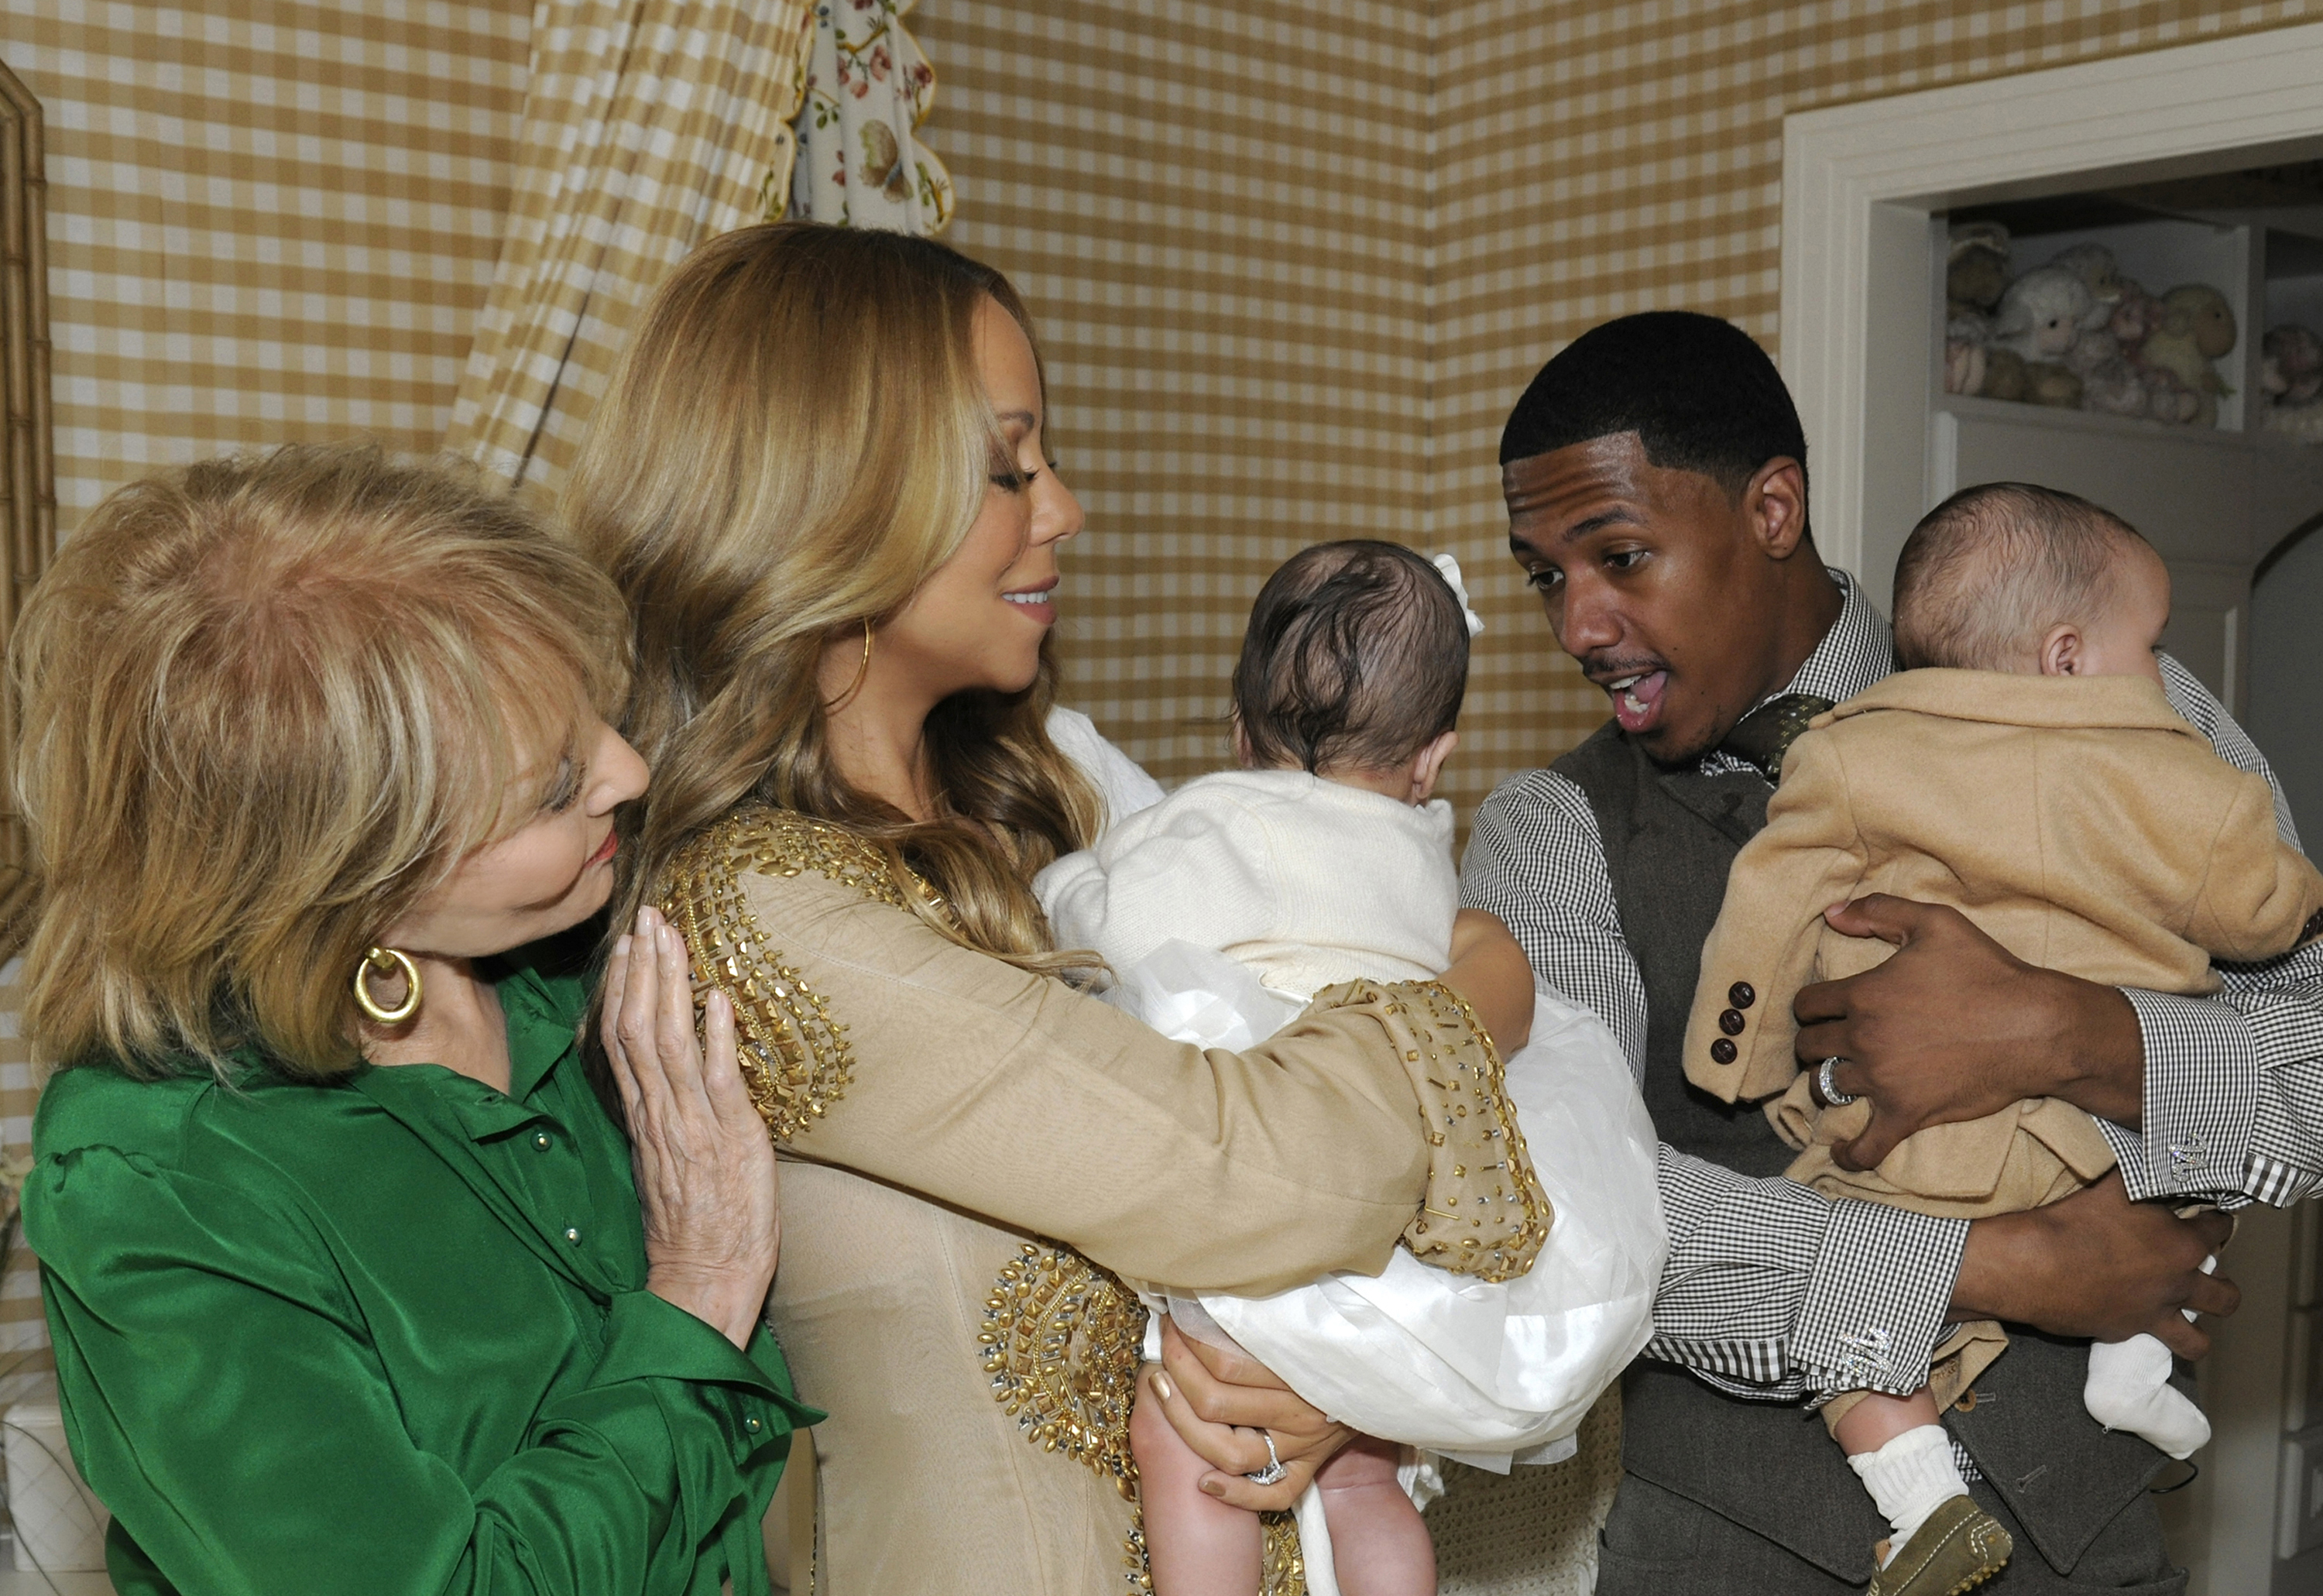 Mariah Carey and Nick Cannon their children Monroe and Moroccan and Barbara Walter on ABB's "20/20" in 2011 | Source: Getty Images